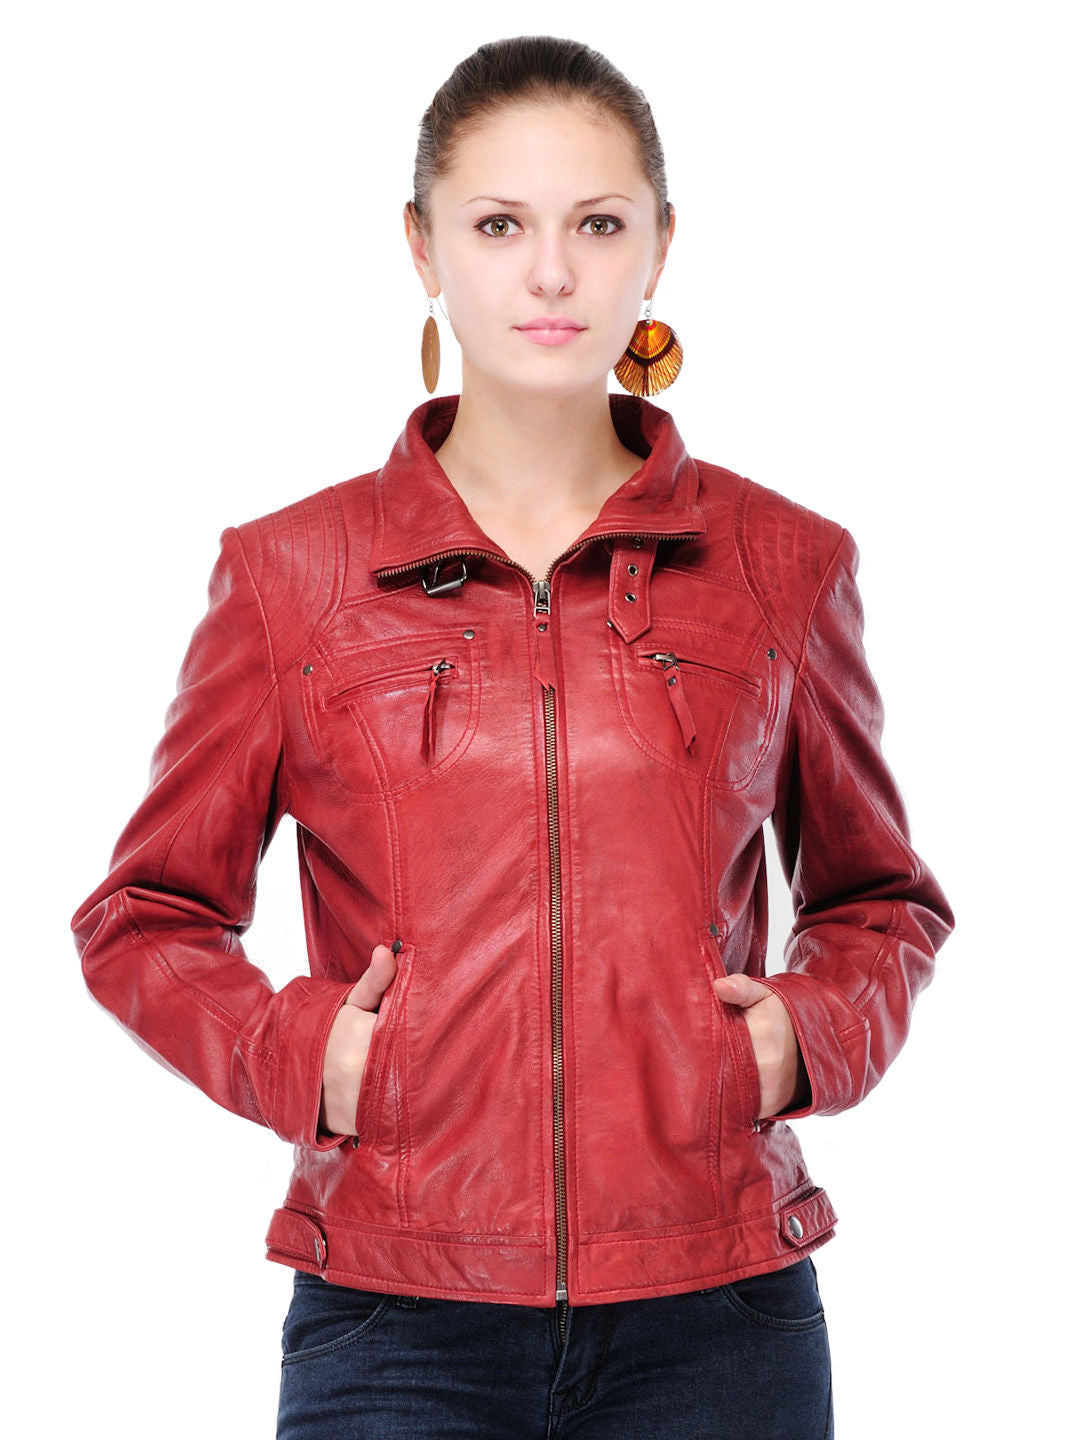 Women's Quilted Motorcycle Red and Black Leather Jacket - Jacket Makers